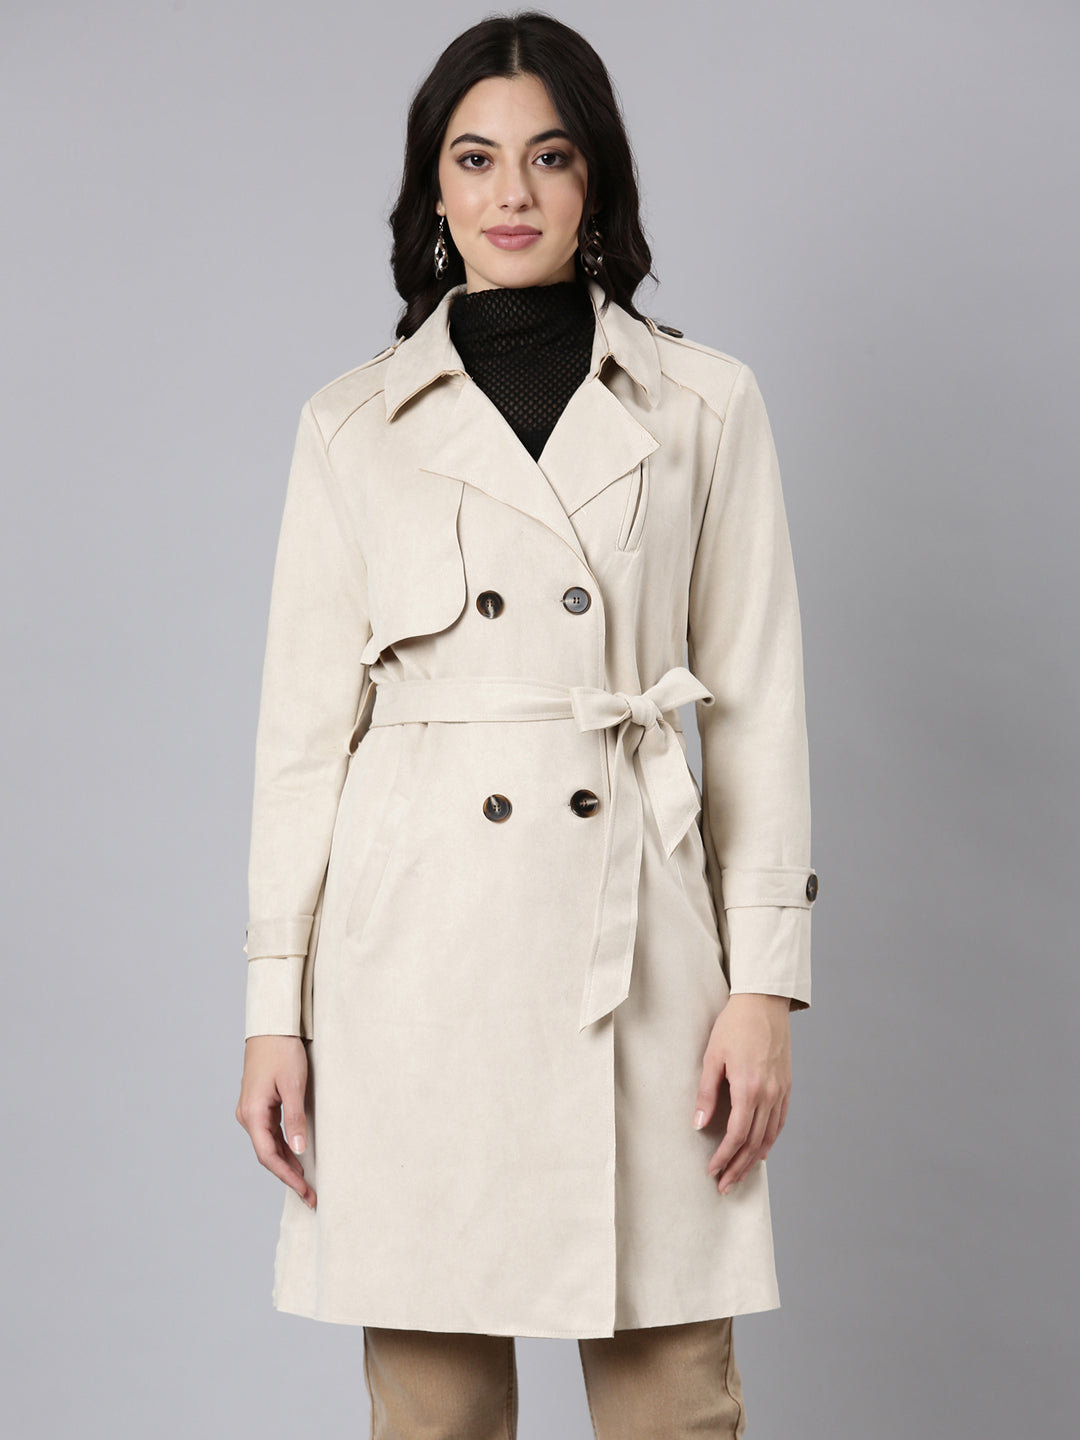 Women Solid Longline Cream Trench Coat comes with Belt